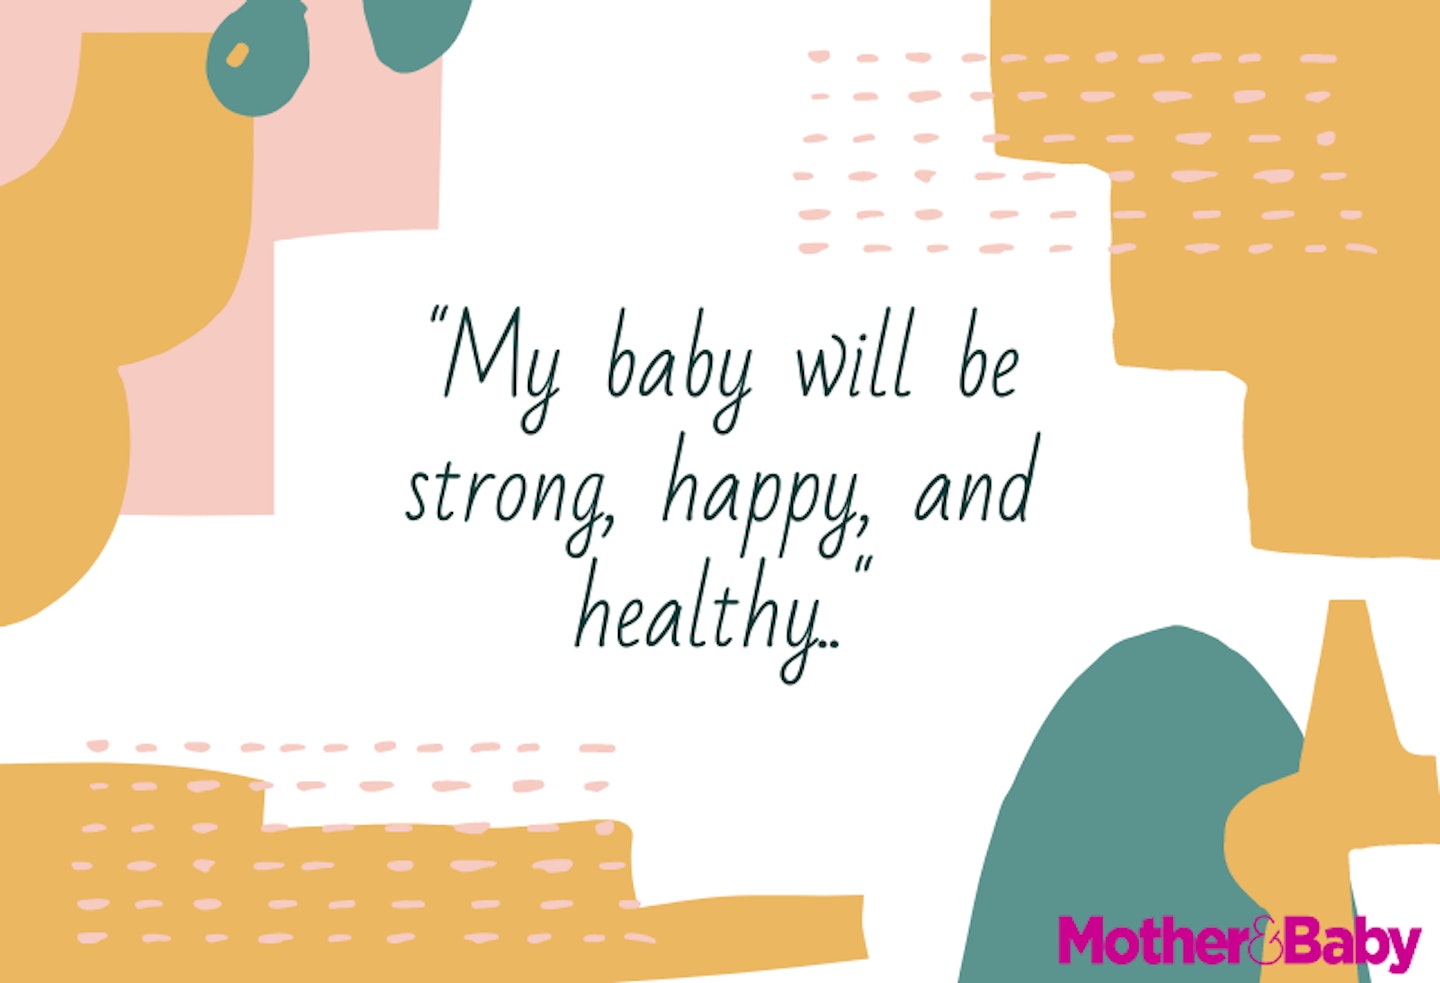 My baby will be strong, happy, and healthy..